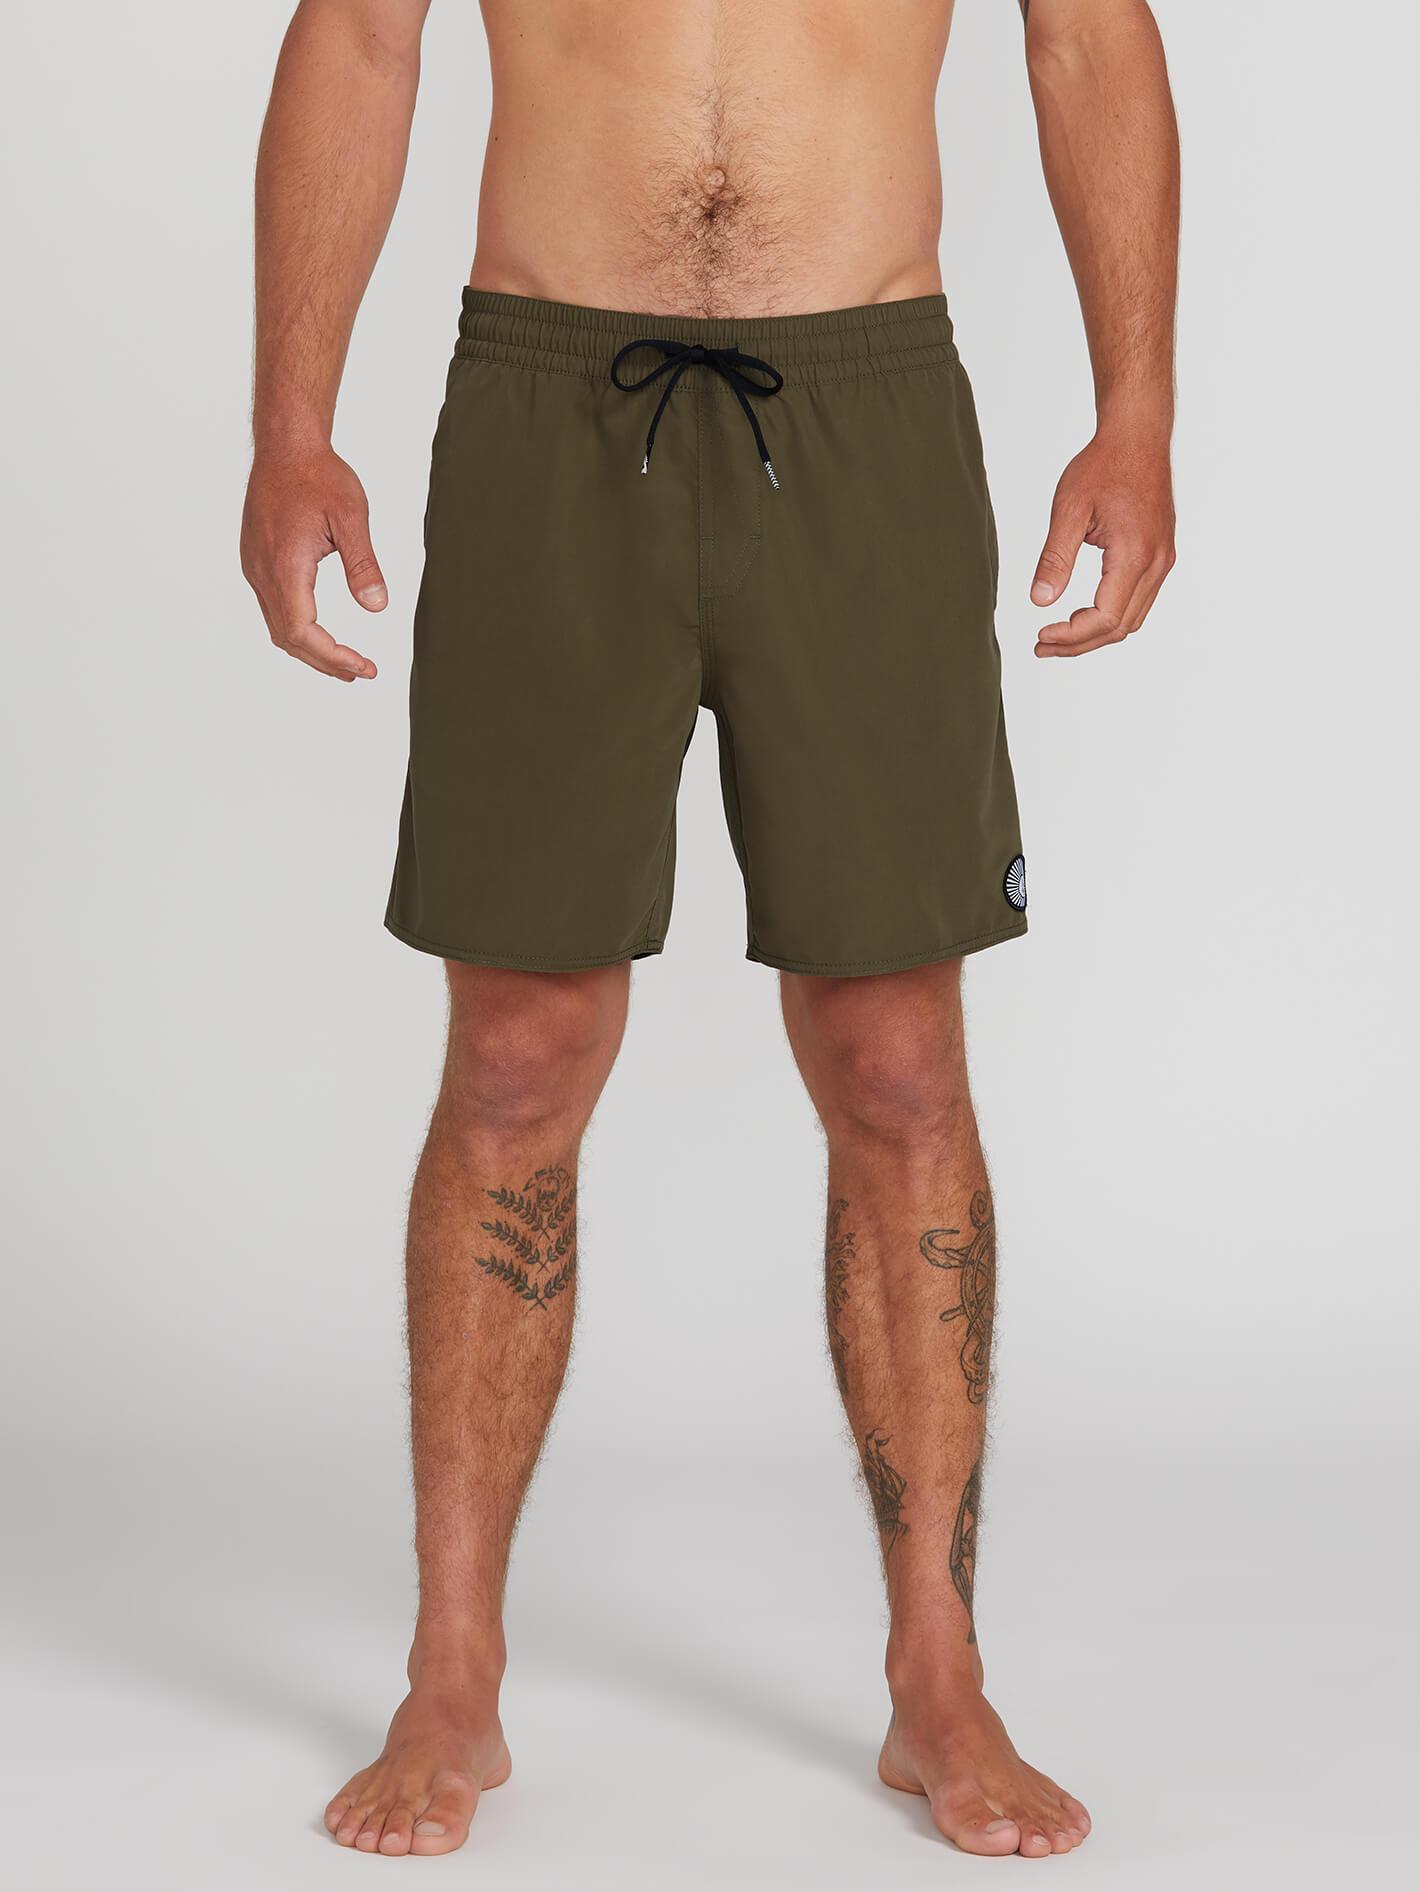 Boardshort Lido Solid Trunk 16 - MILITARY